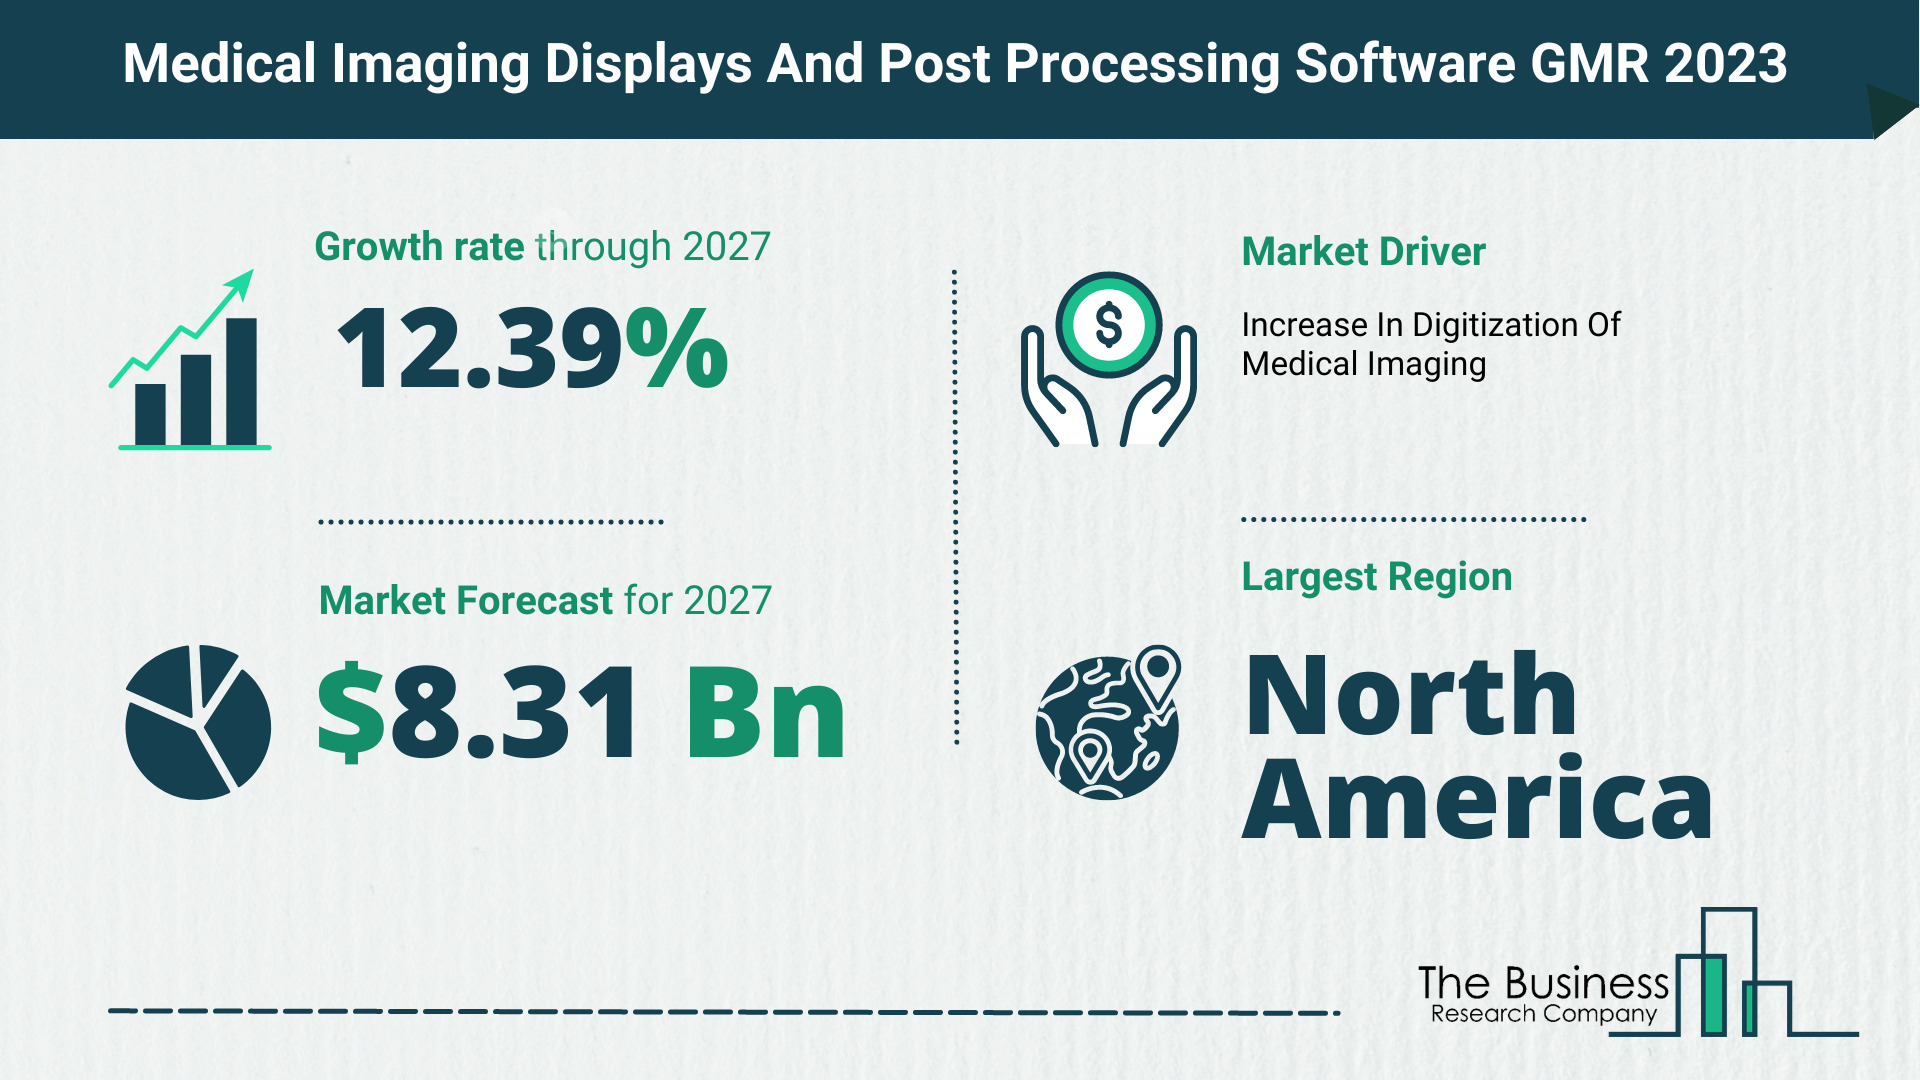 What Will The Medical Imaging Displays And Post Processing Software Market Look Like In 2023?